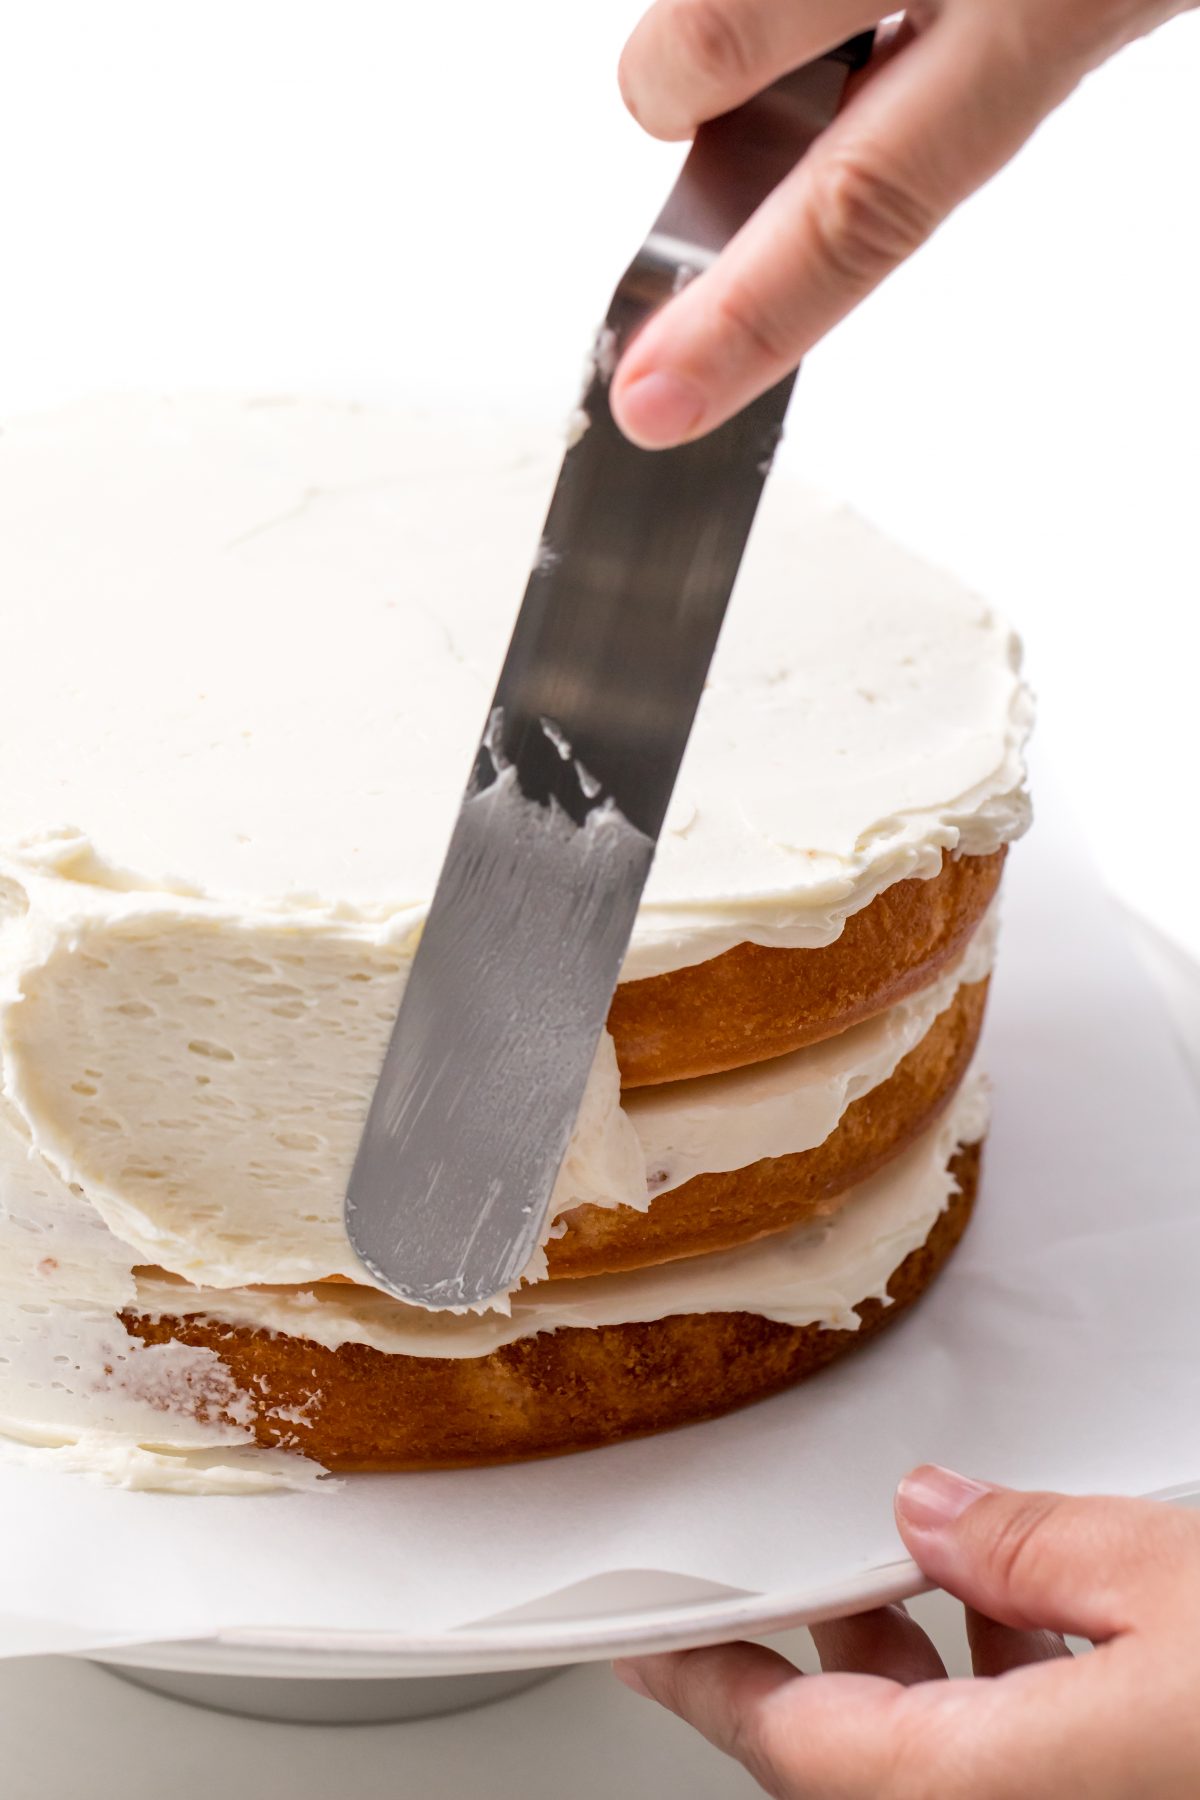 Apply buttercream frosting to sides of cake